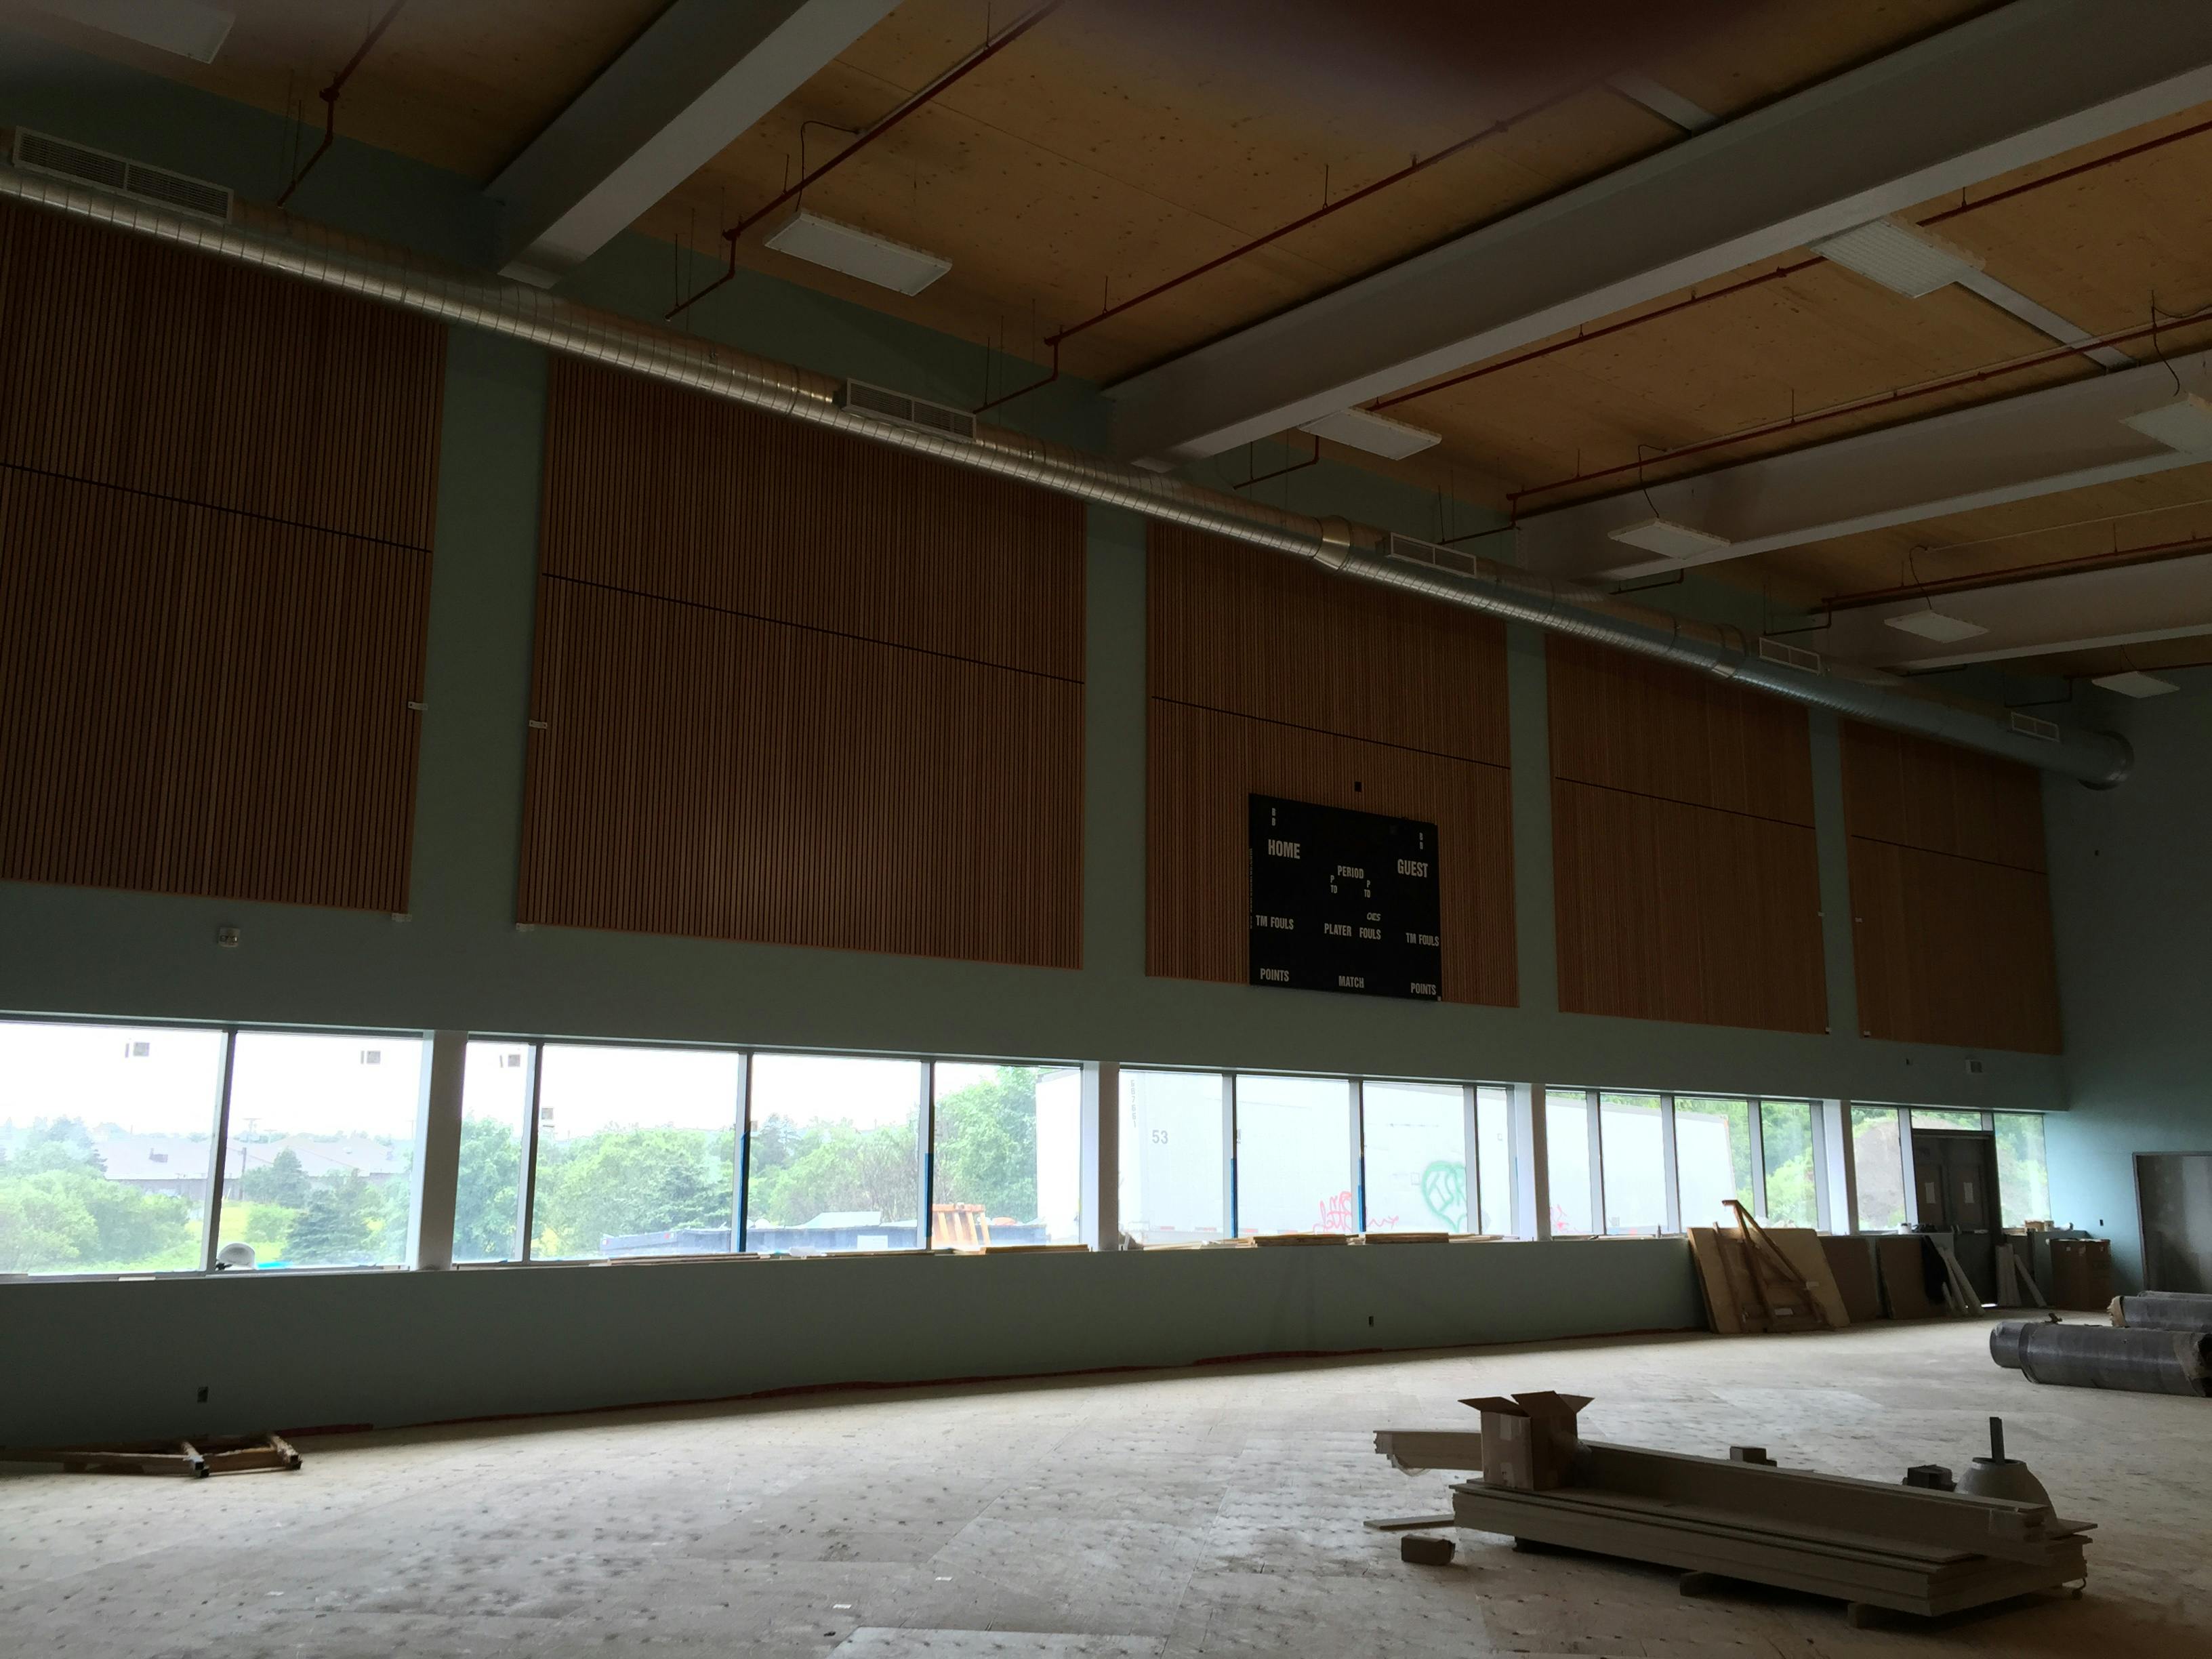 view of the gym, July 20